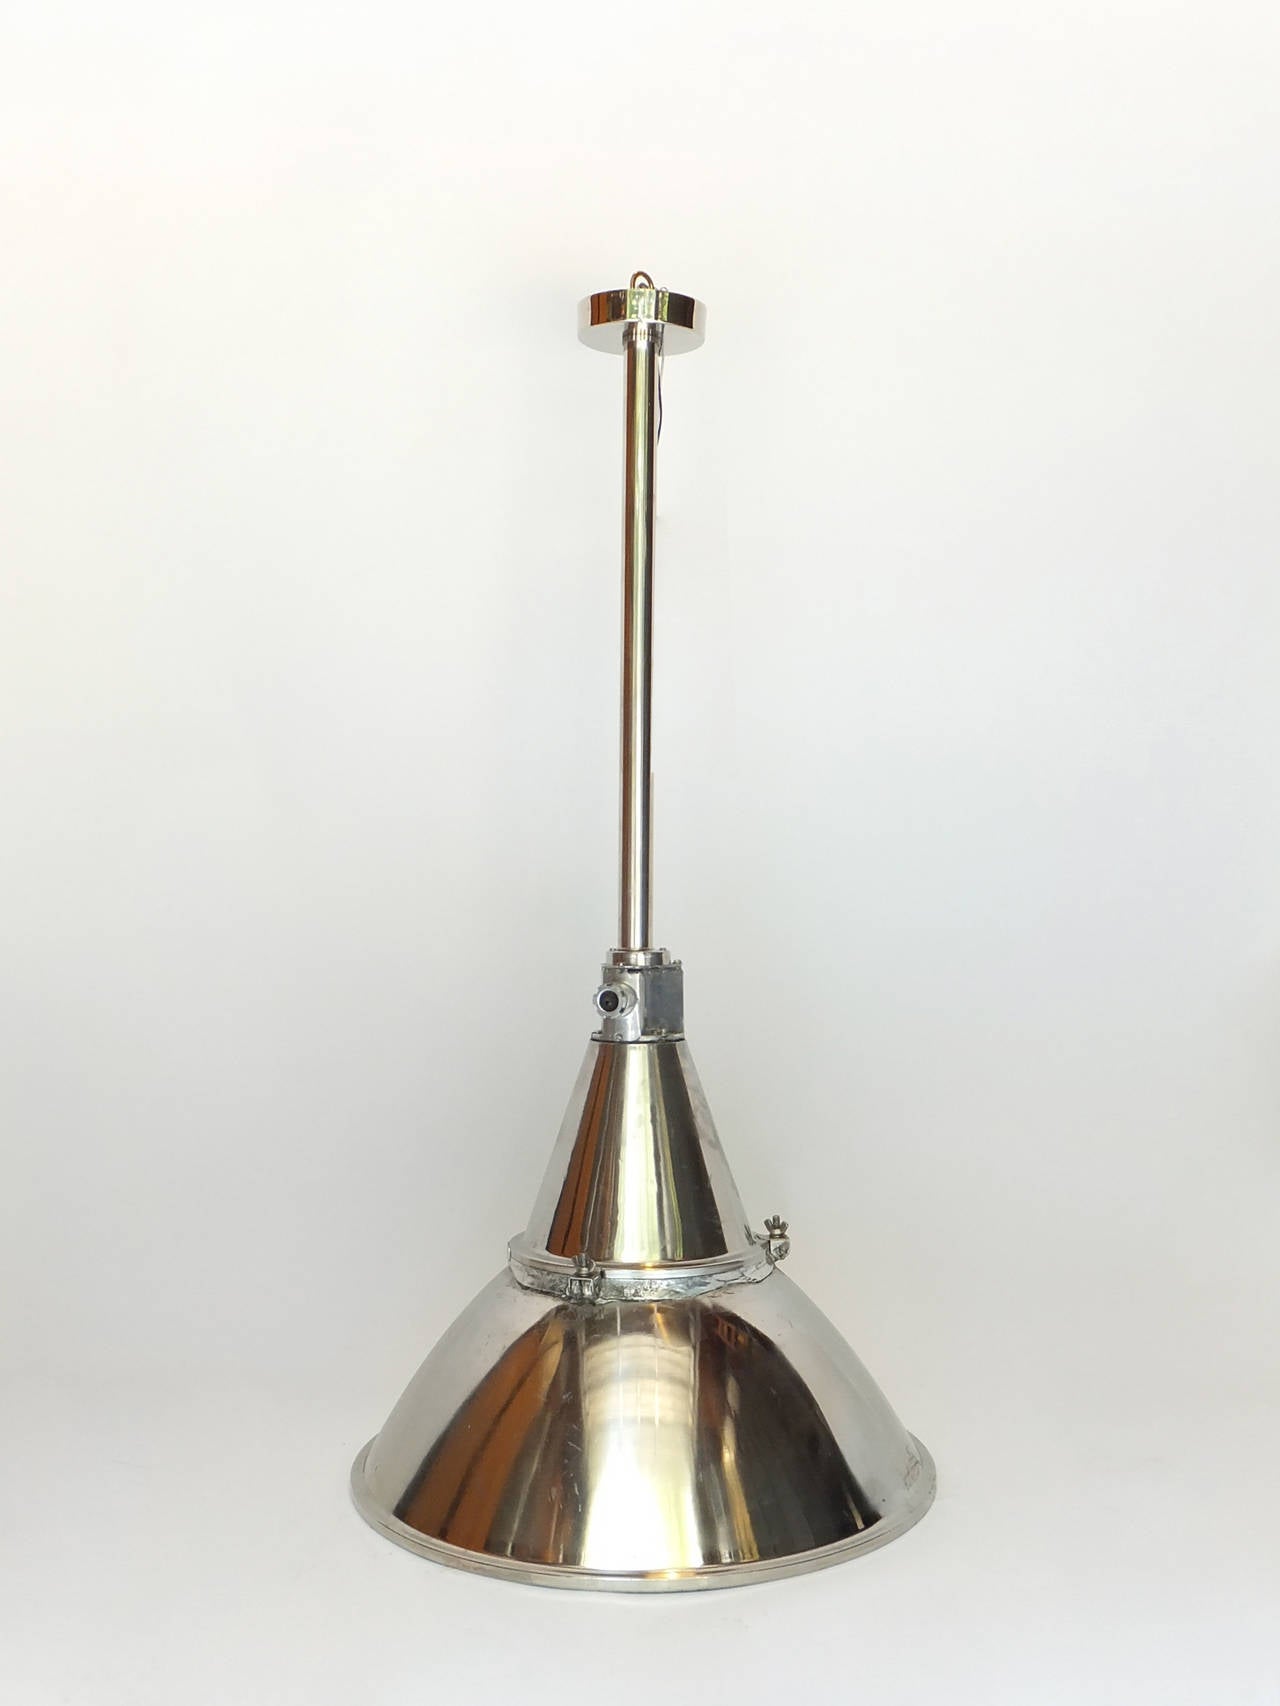 Pair of industrial chrome Ship Lights- poles and canopies are new and poles can be adjusted to suit.